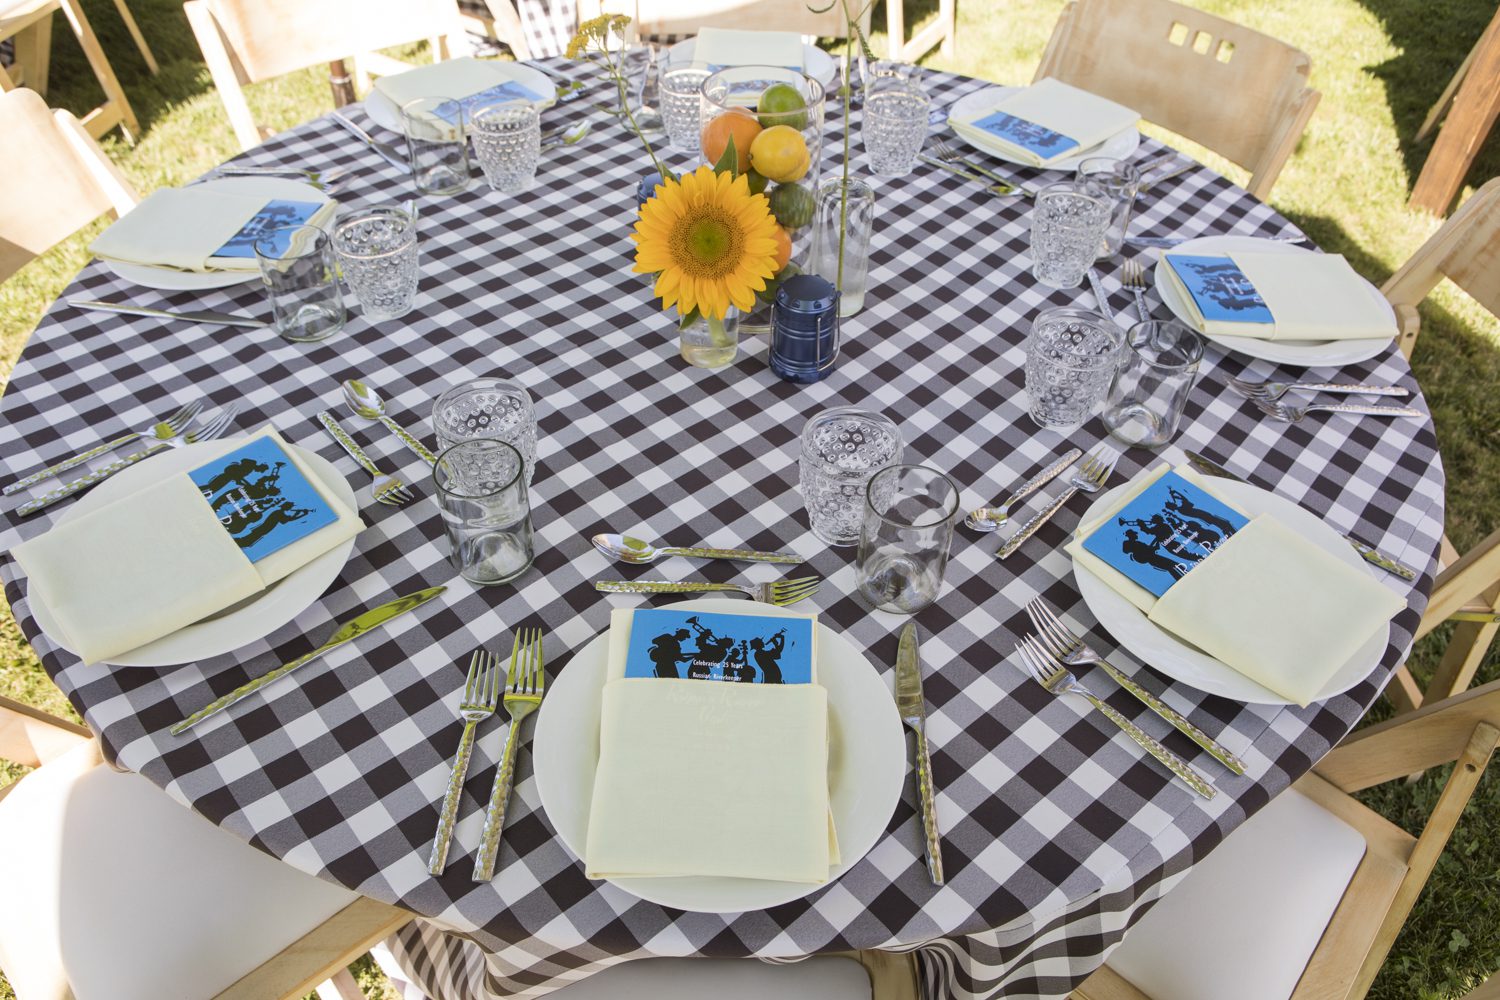 A table setting with a checkered tablecloth and sunflowers.